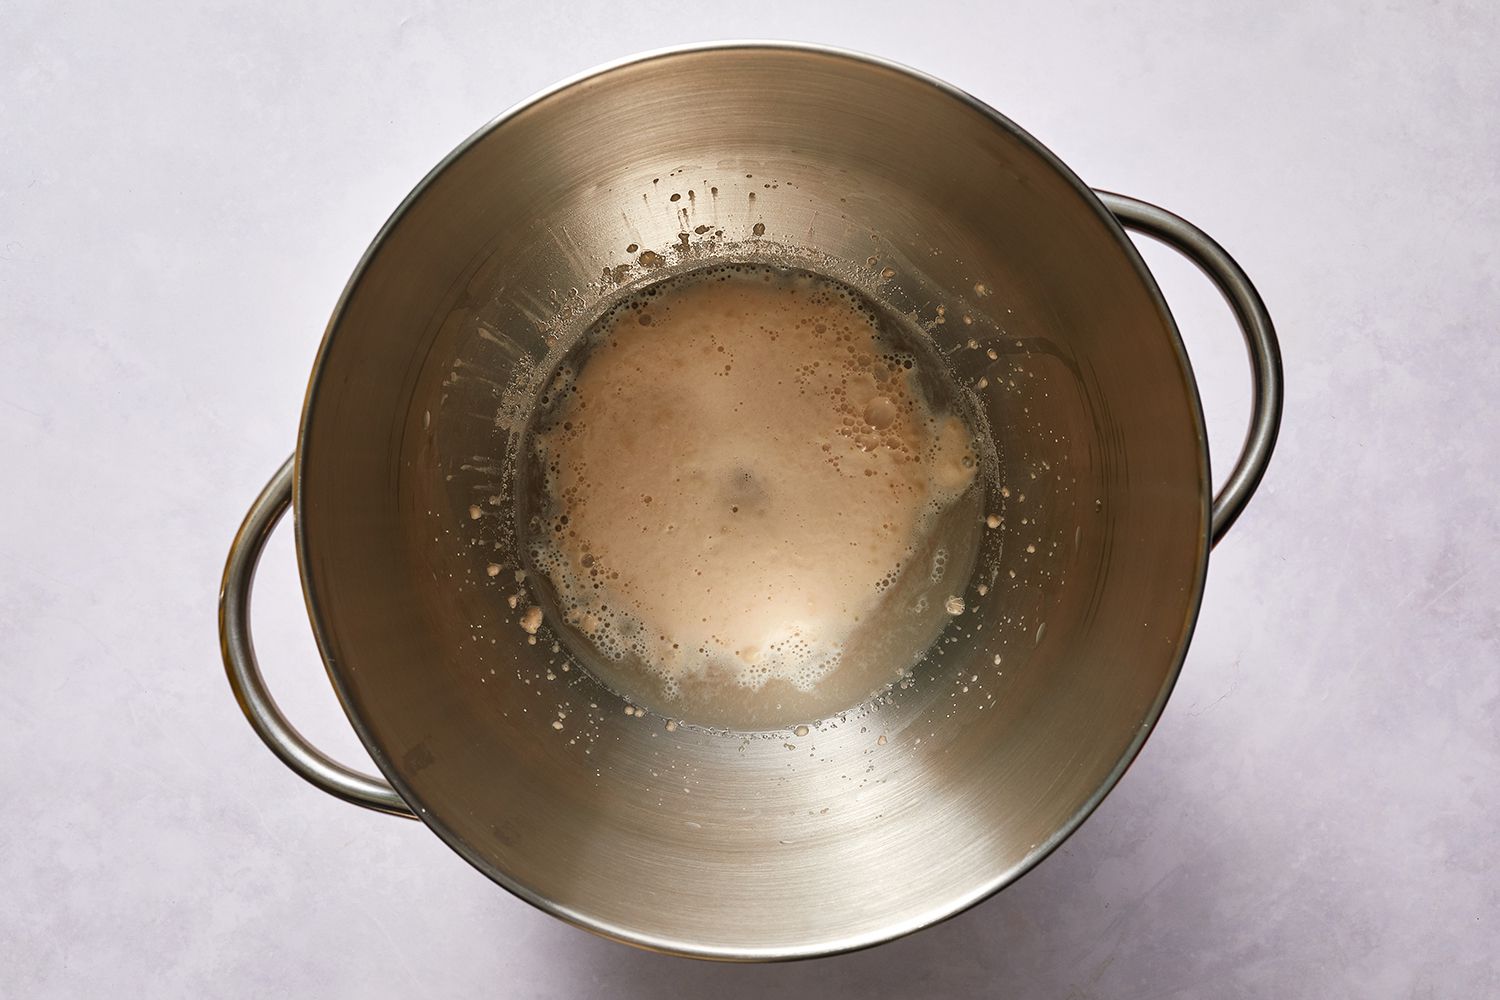 Honey, water and yeast in a bowl 